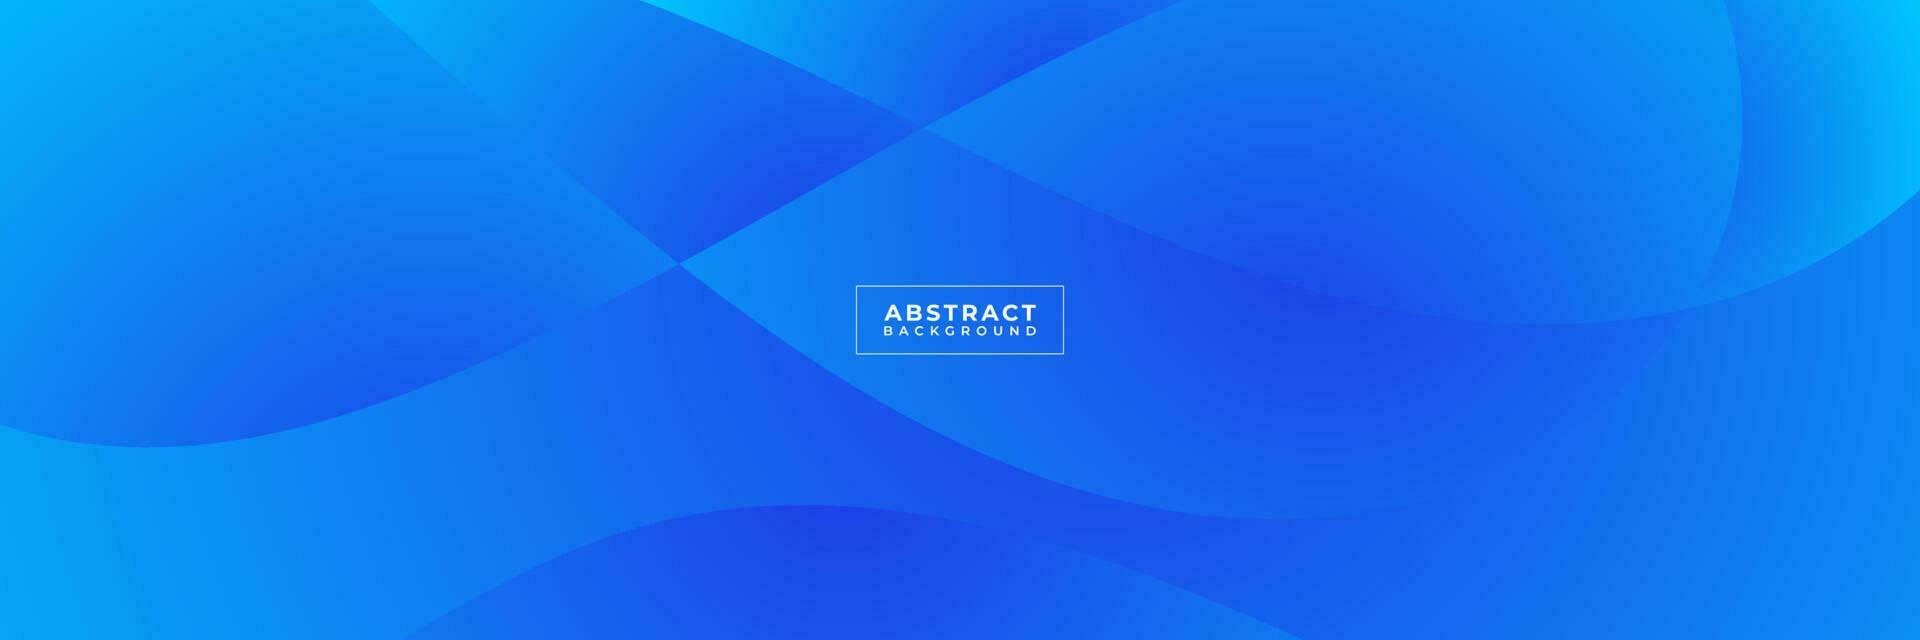 abstract blue colorful gradient background vector illustration